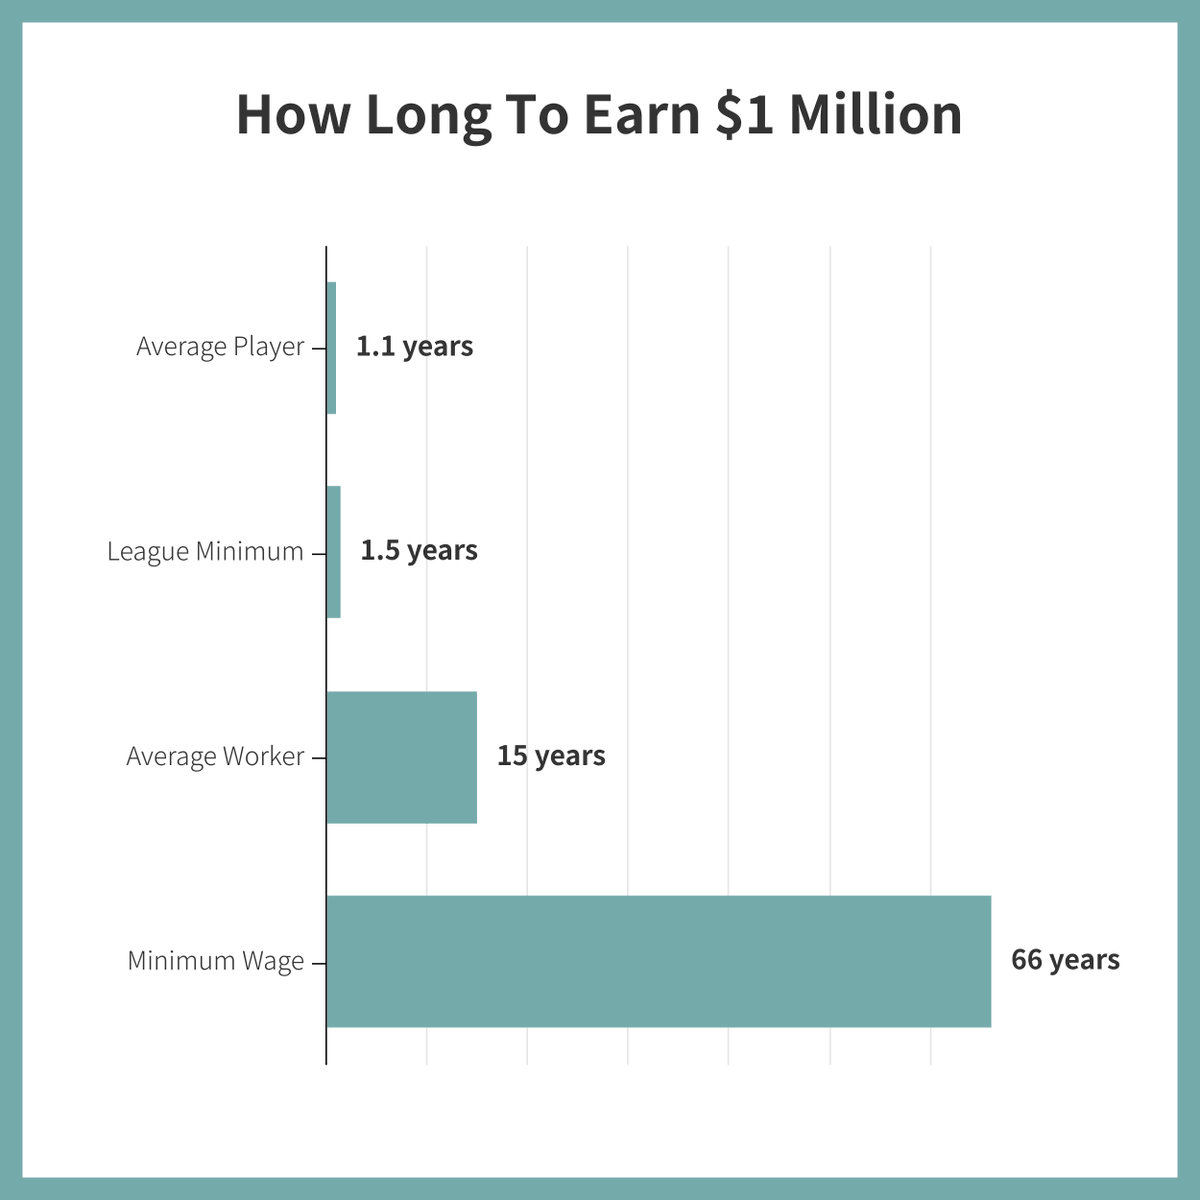 Most NFL players ACTUALLY make about $880k per year. With their career lasting about 2.5 years for ~$2.2 million in total earnings.For an average worker to make that same amount, it would take 20-30 years.Even with a short career, most players could be set for life.